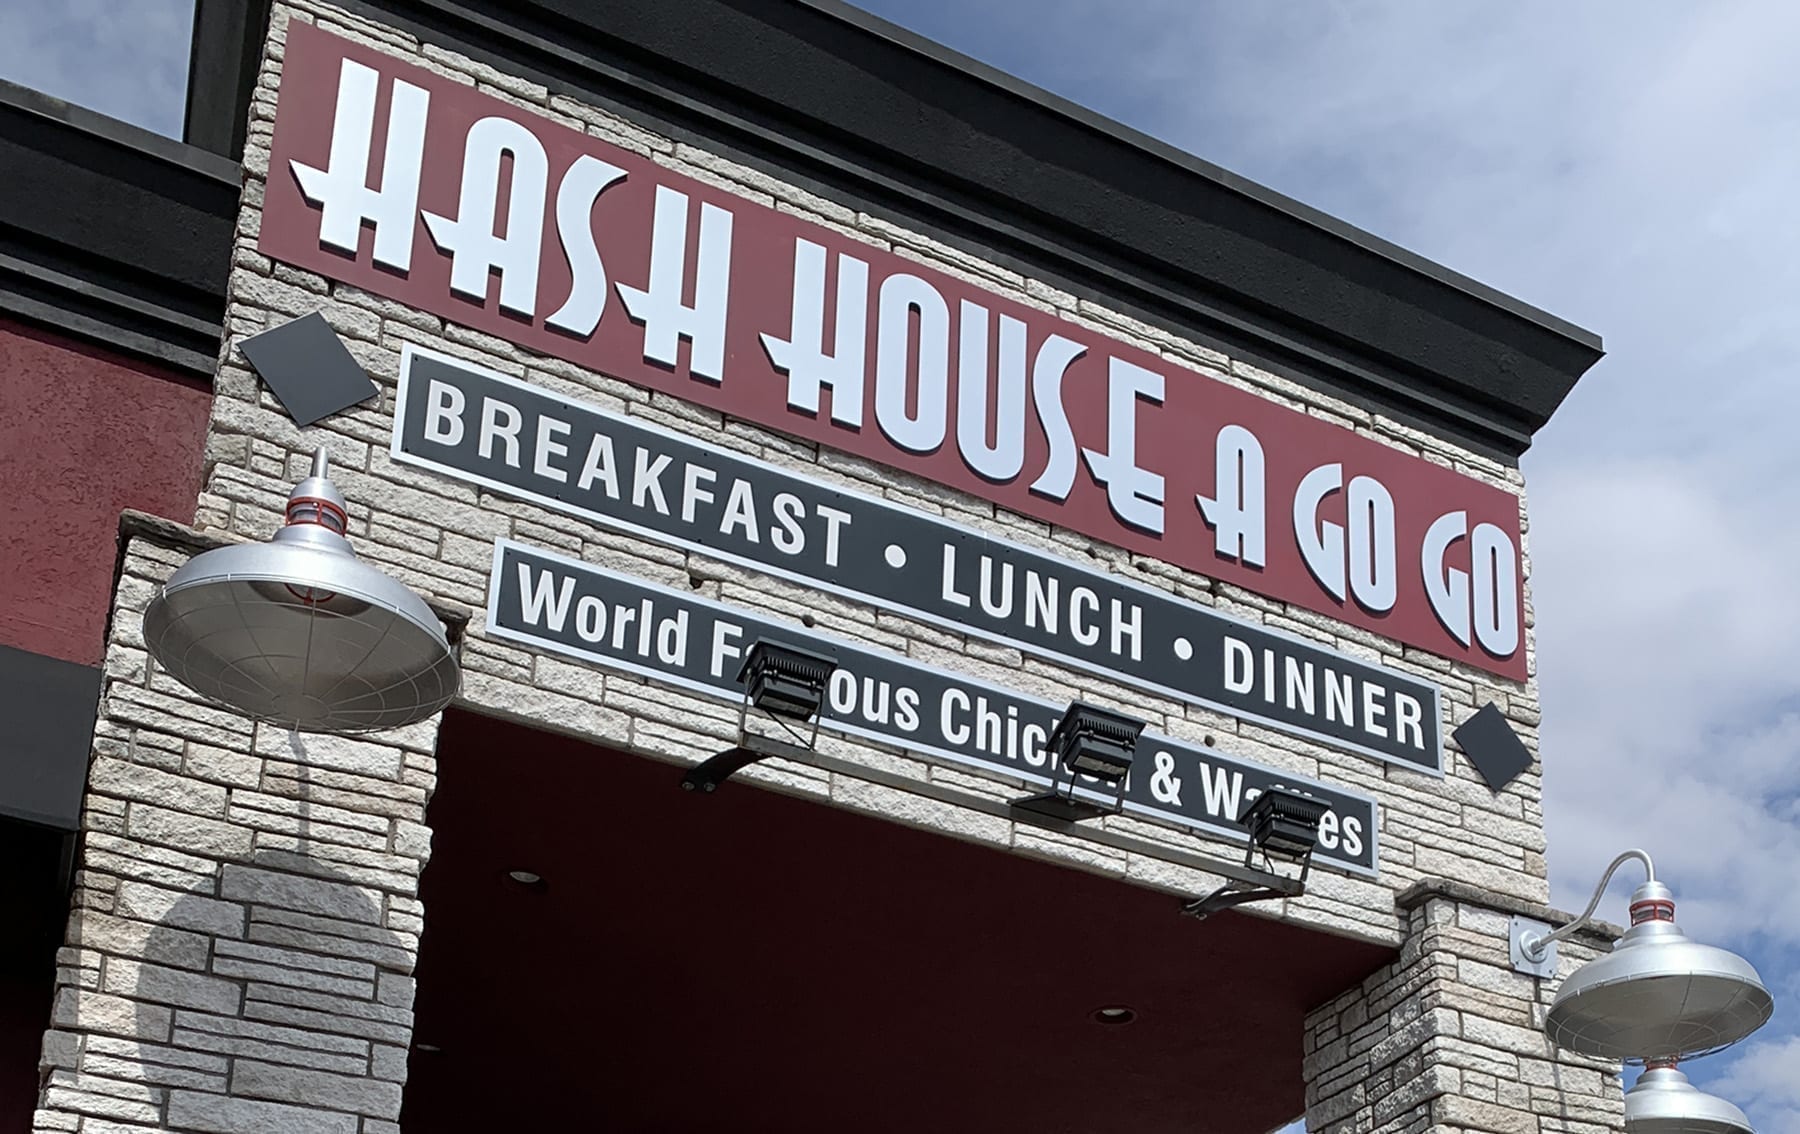 hash house a go go delivery san diego